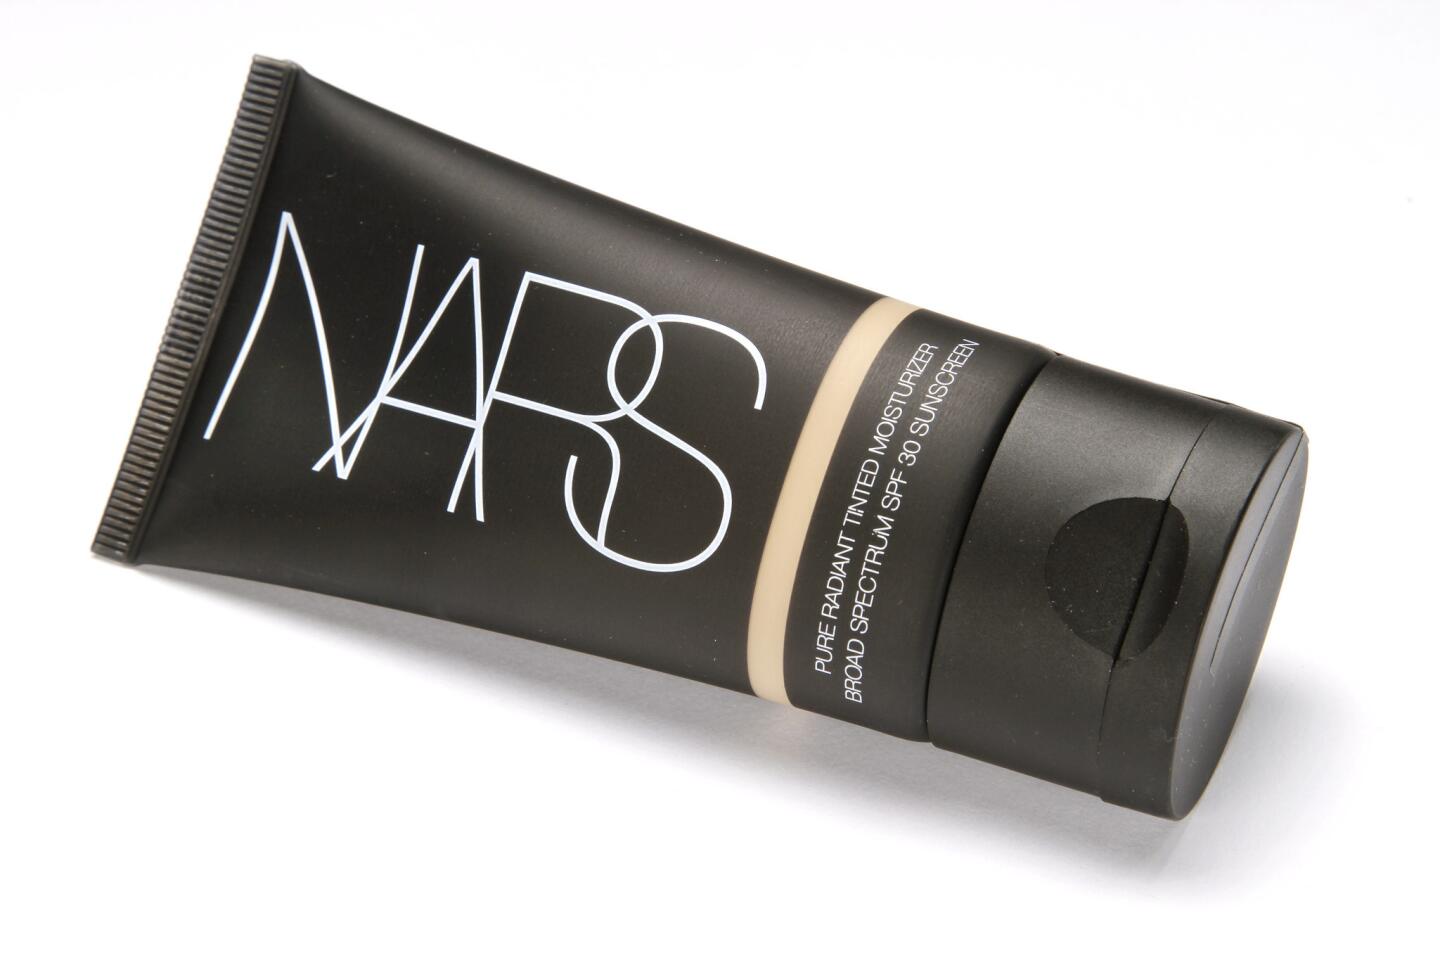 Hot weather calls for makeup that will stay put and look natural. Commercial makeup artist Allie Lapidus recommends using oil-free, highly pigmented concealers and moisturizers, instead of foundation, and applying as little as possible to prevent it from sliding. Nars Pure Radiant tinted moisturizer ($42) incorporates broad-spectrum sun protection.